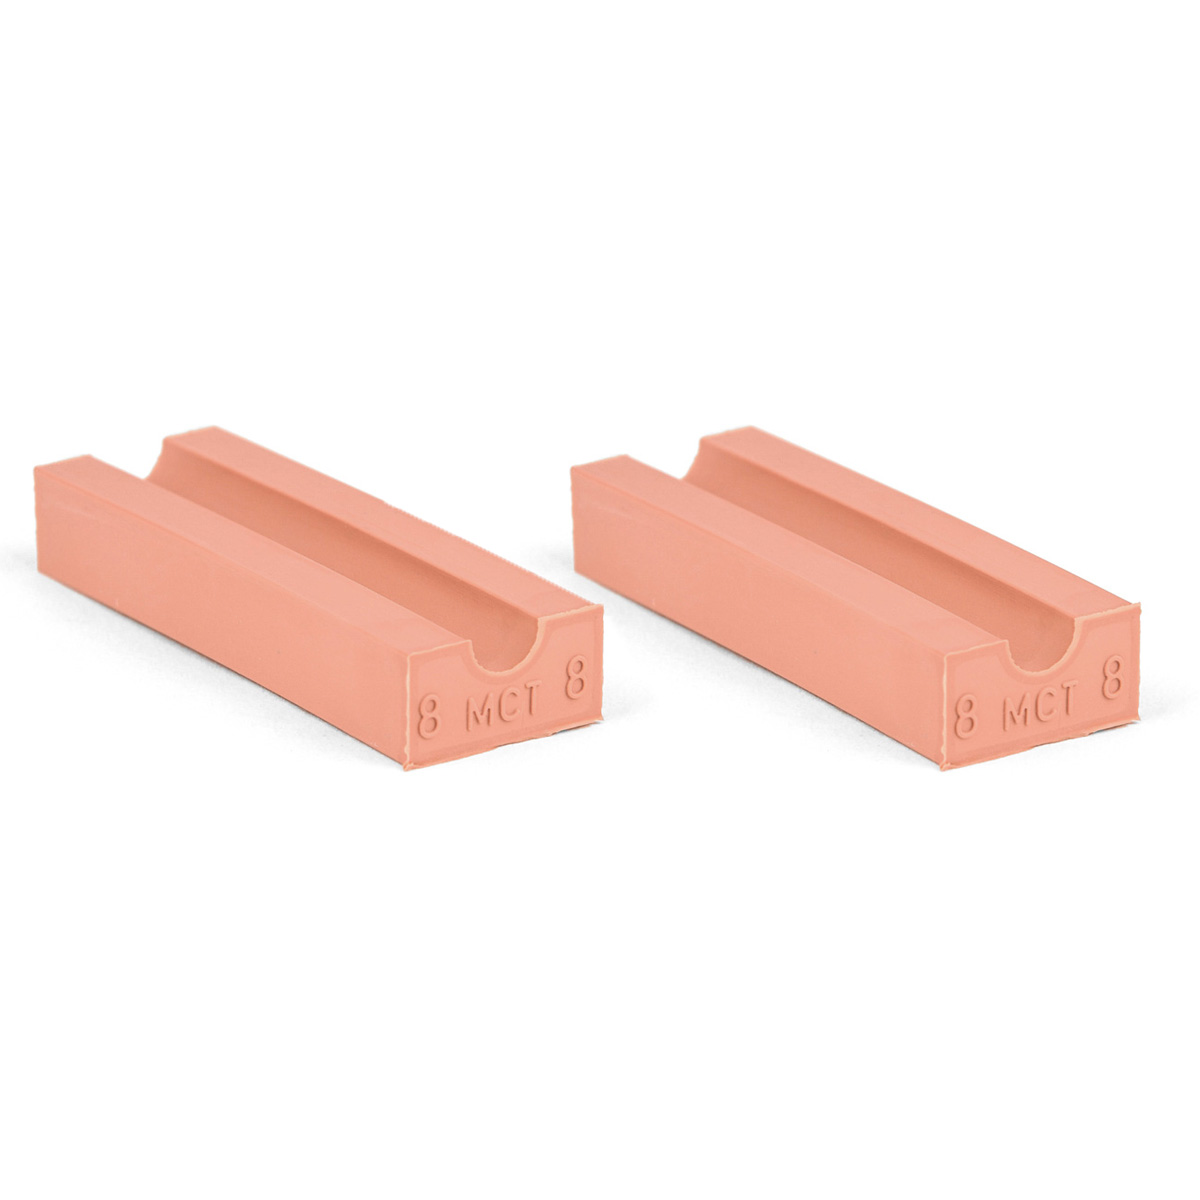 20-08*2 Set of 2 half insert block lycron, 20-08 for cable/pipe diam. 7.5-8.5mm